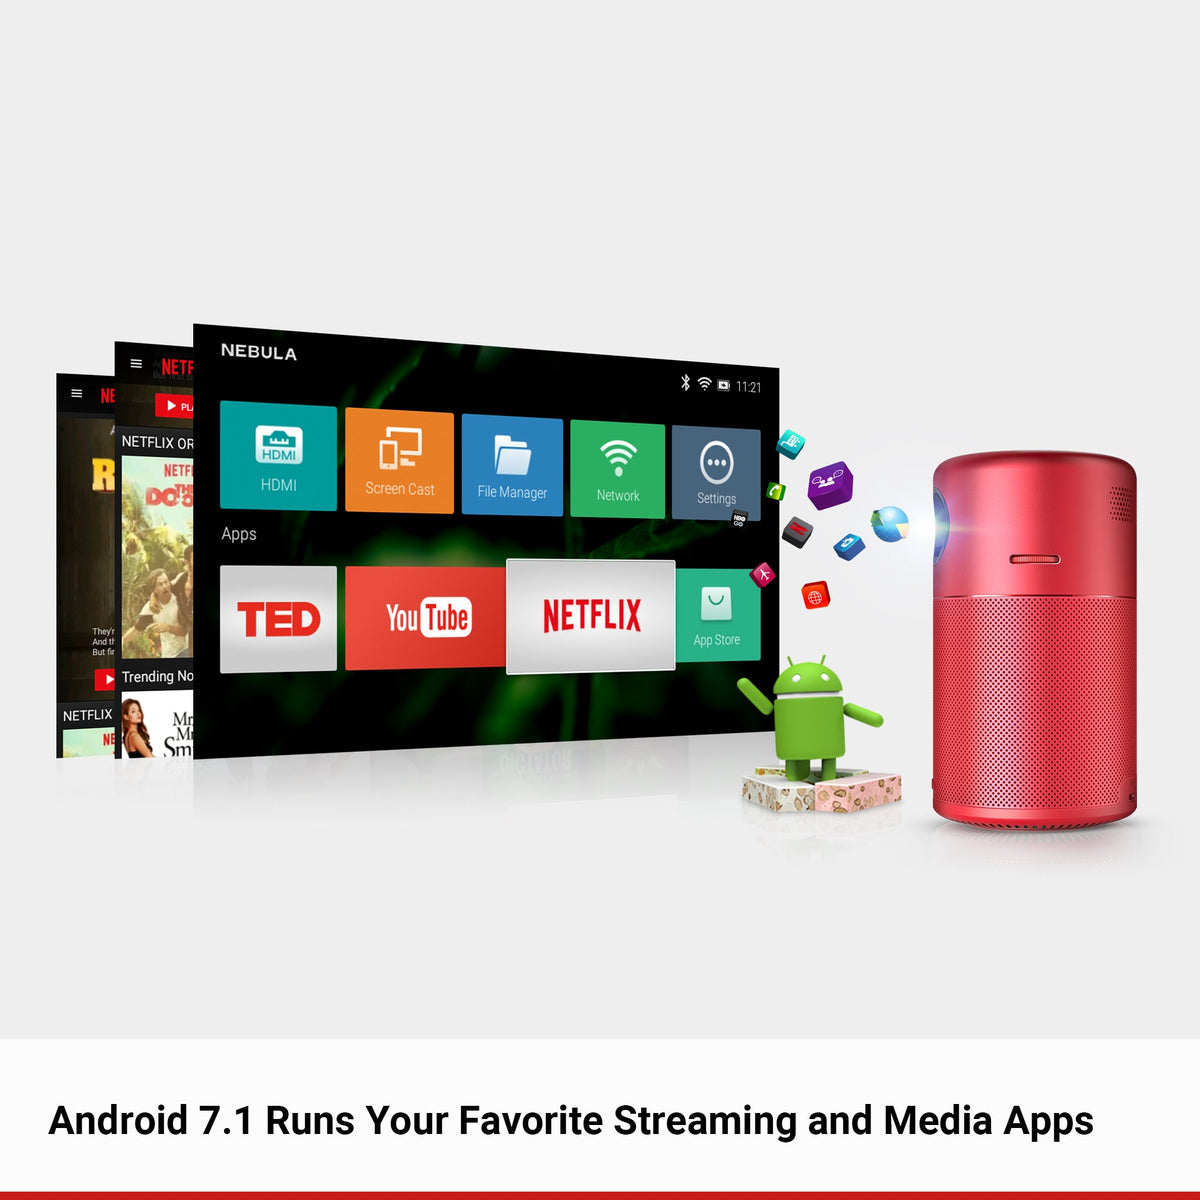 A red Nebula Capsule portable projector displays several apps onto a screen, while the Android logo points.